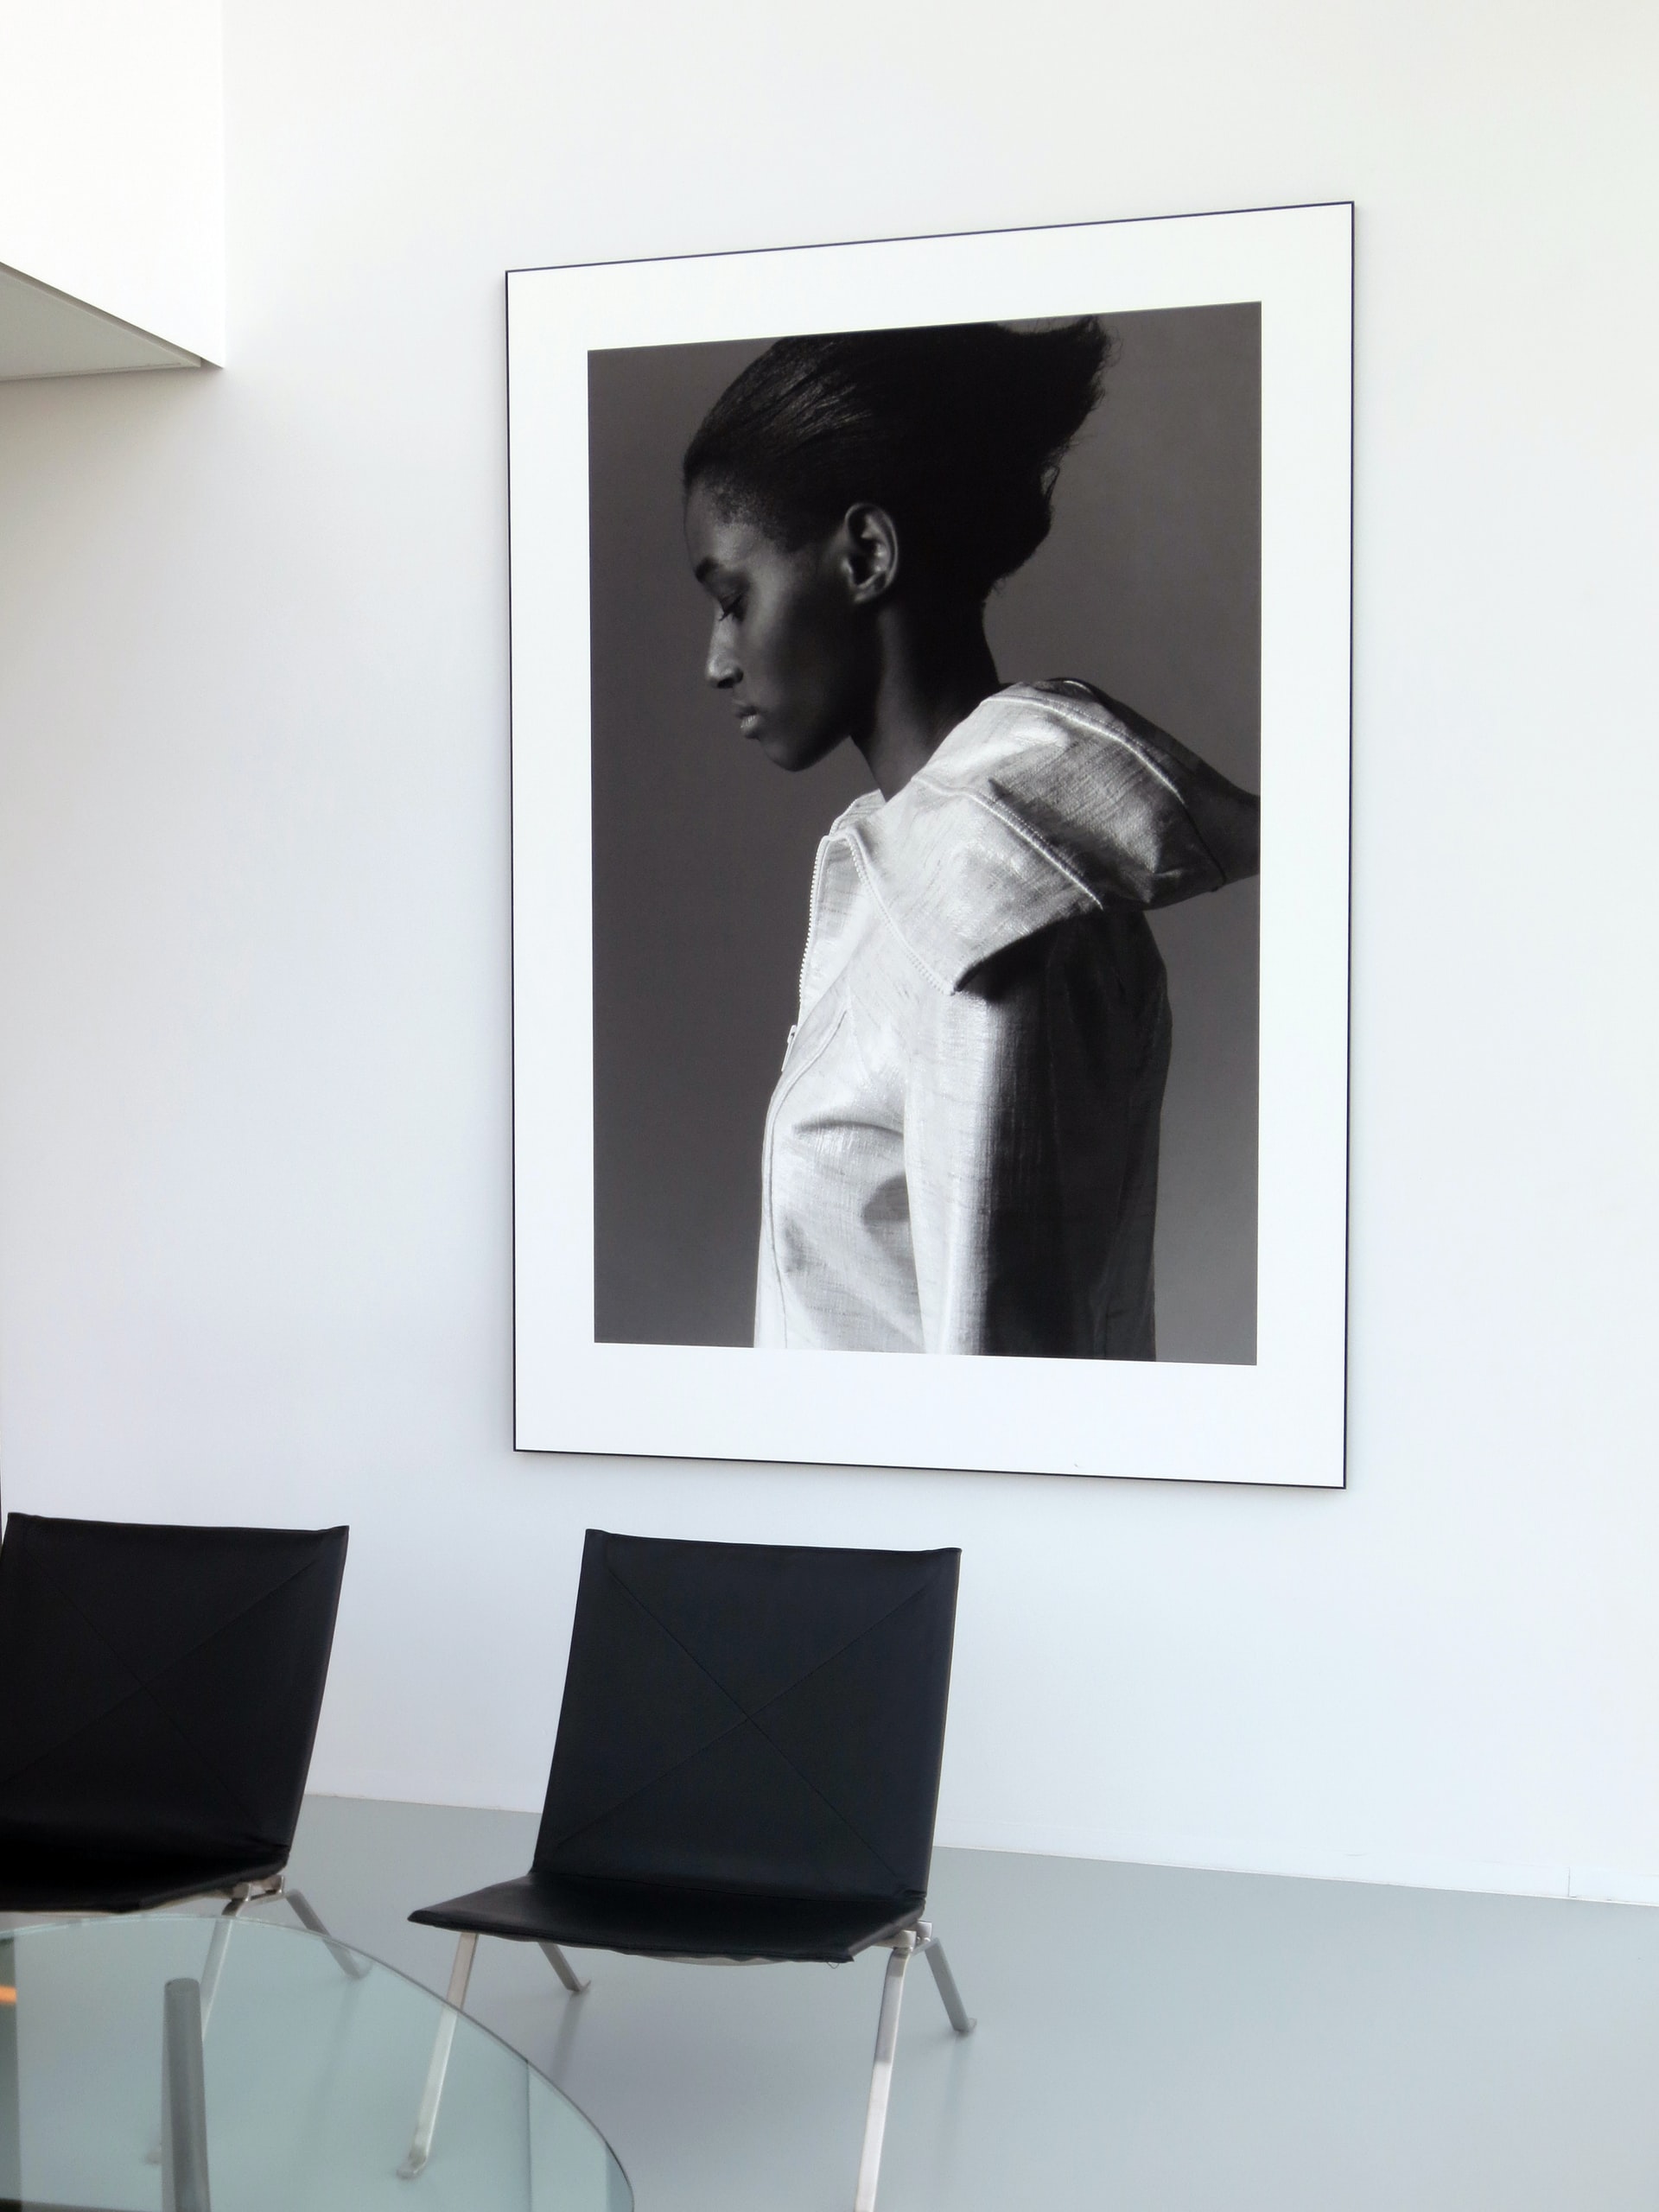 Woman Wearing White Top on Art Frame Black and White